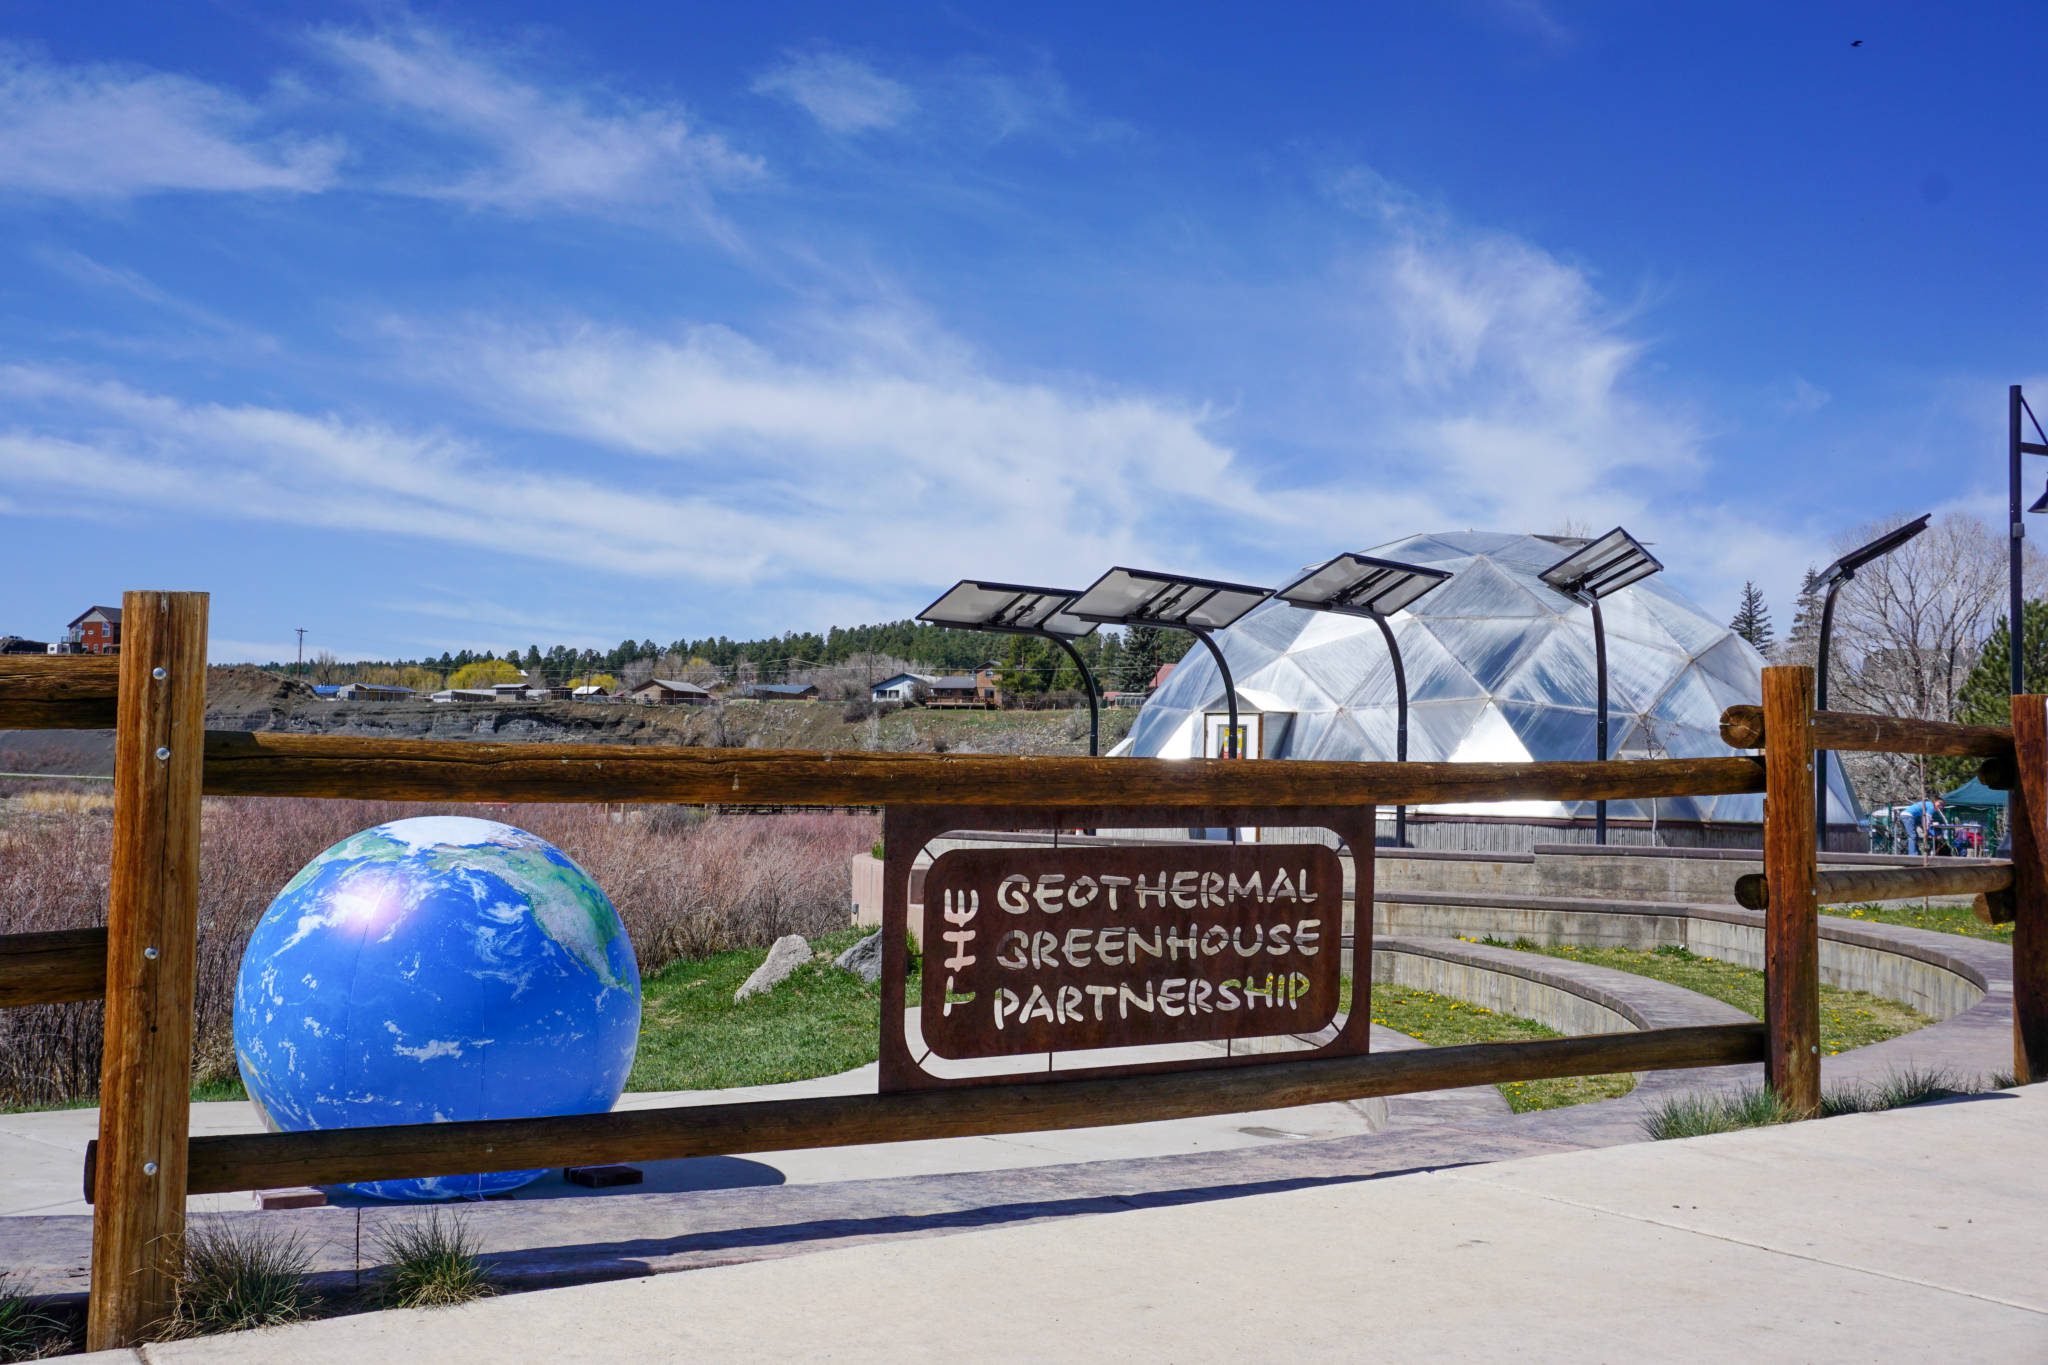 geothermal greenhouse partnership community park on earth day